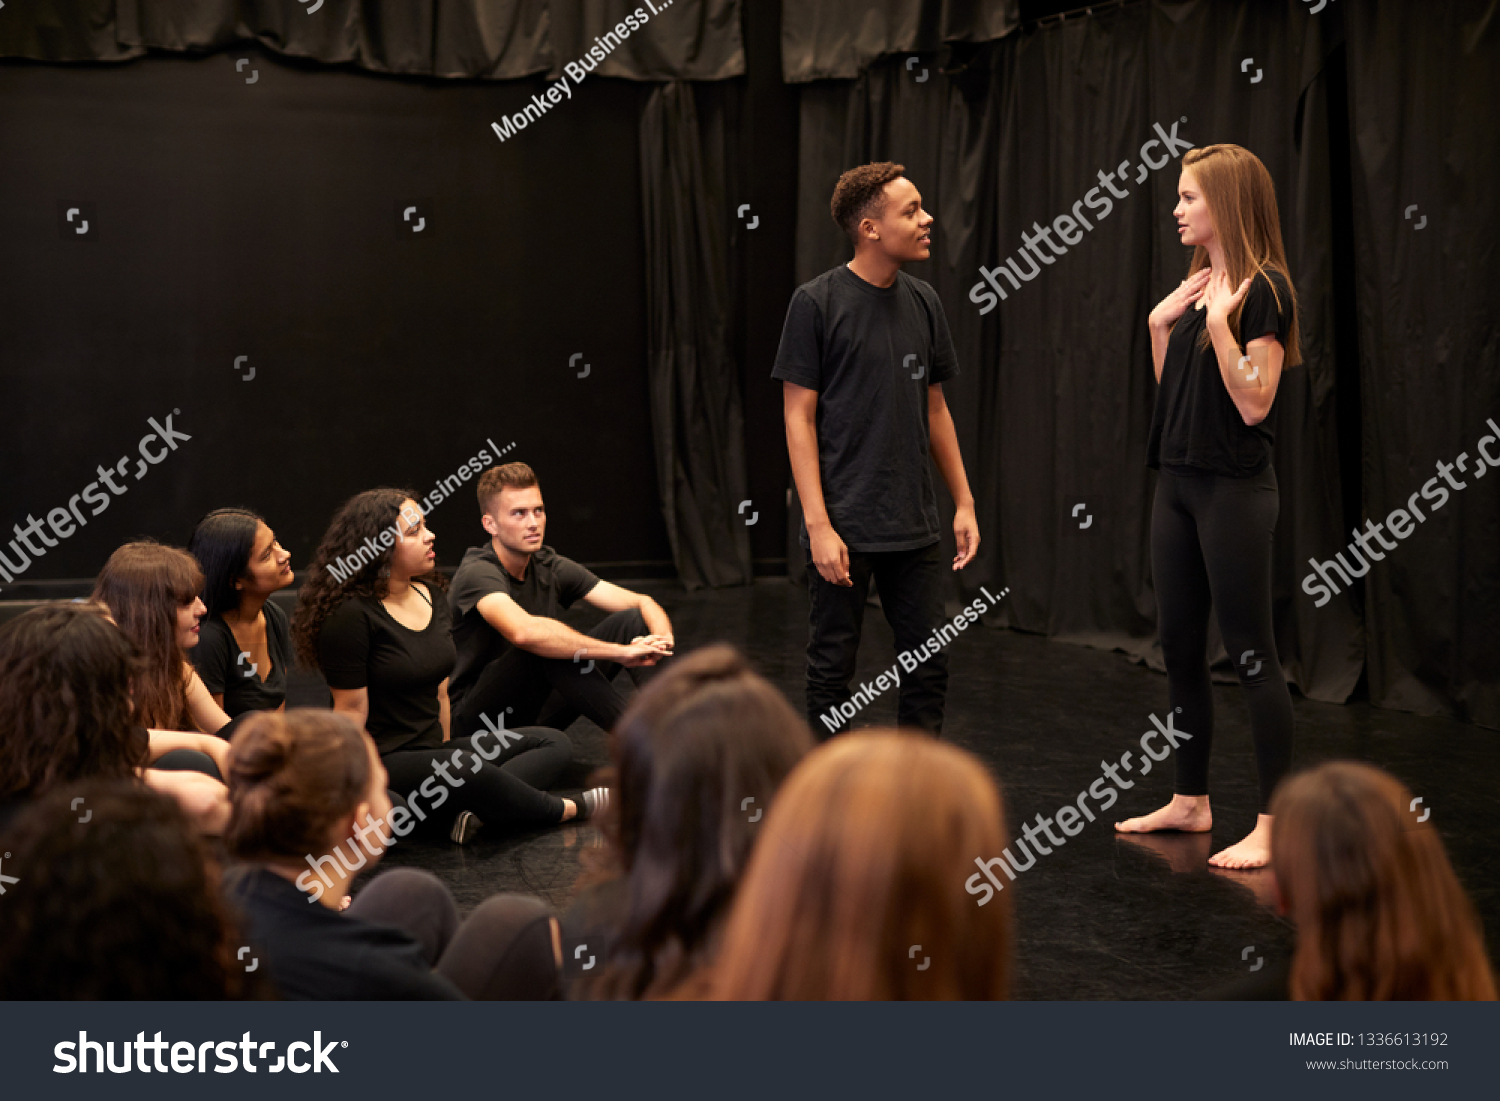 Male And Female Drama Students At Performing Arts School In Studio Improvisation Class #1336613192